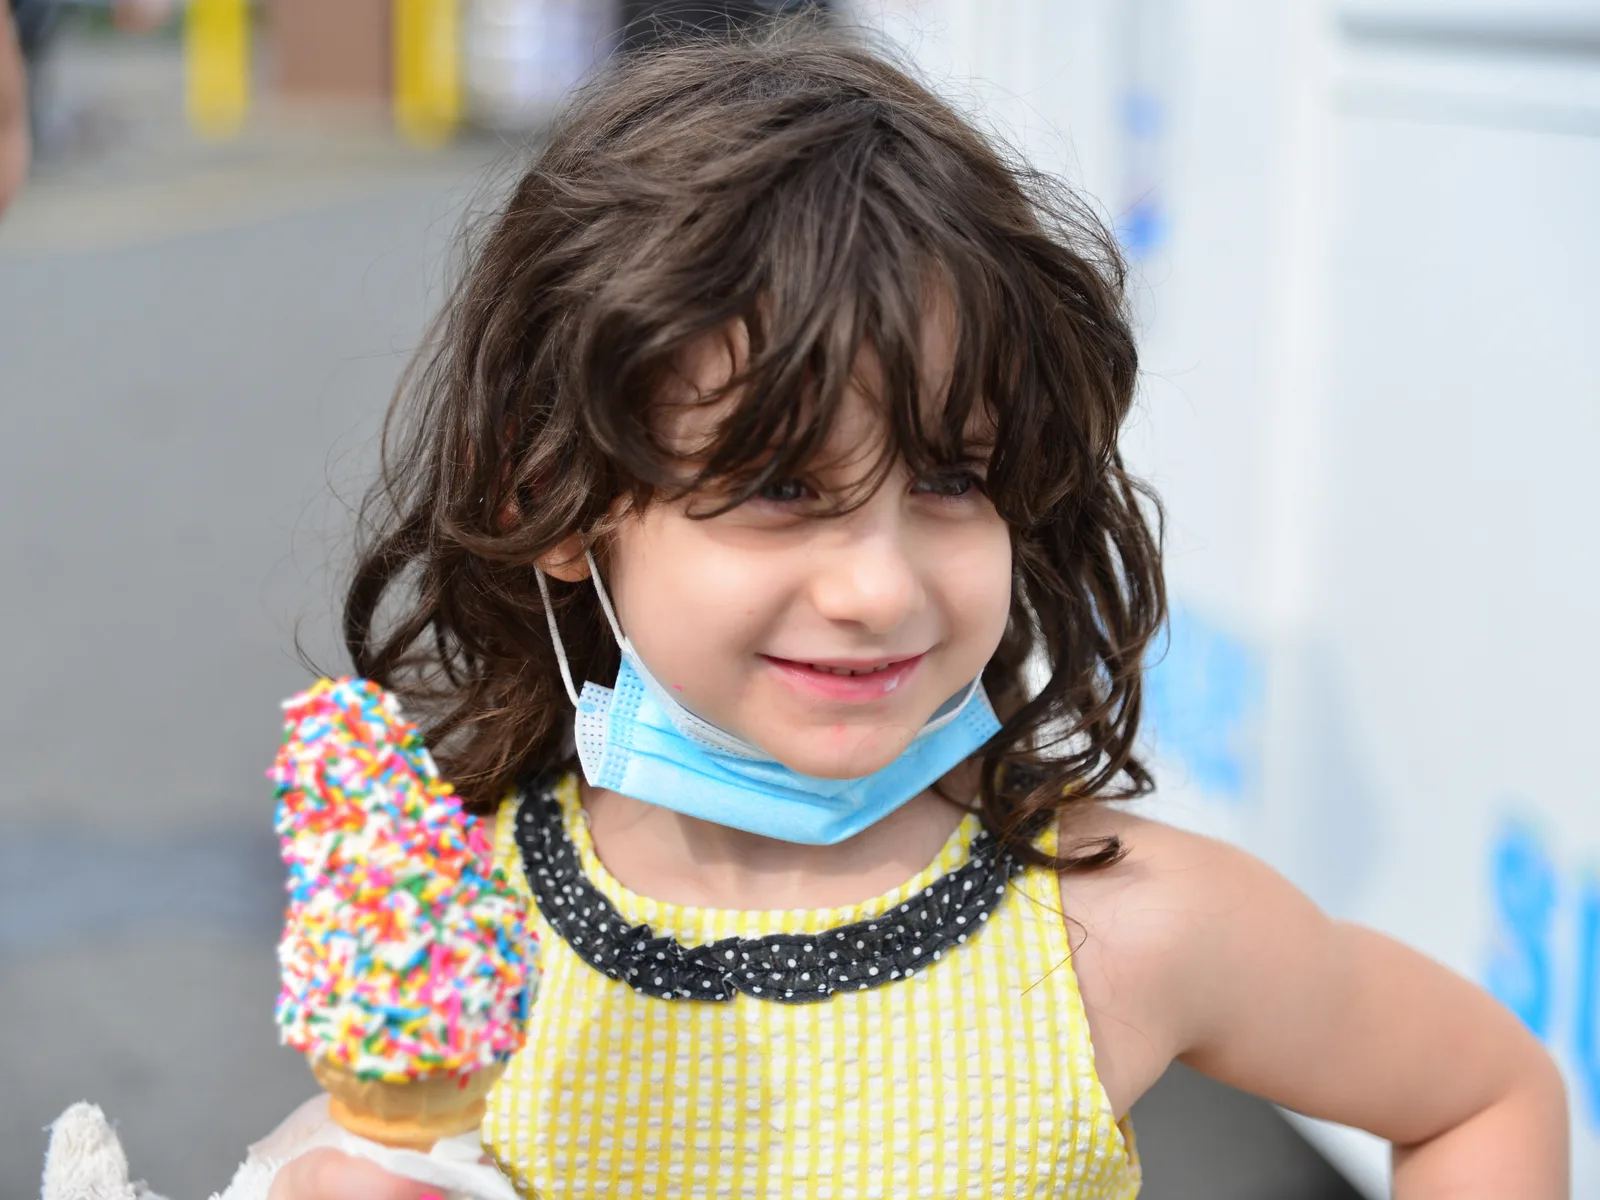 Girl with a Schoolhouse Messy Shaglet getting ice cream